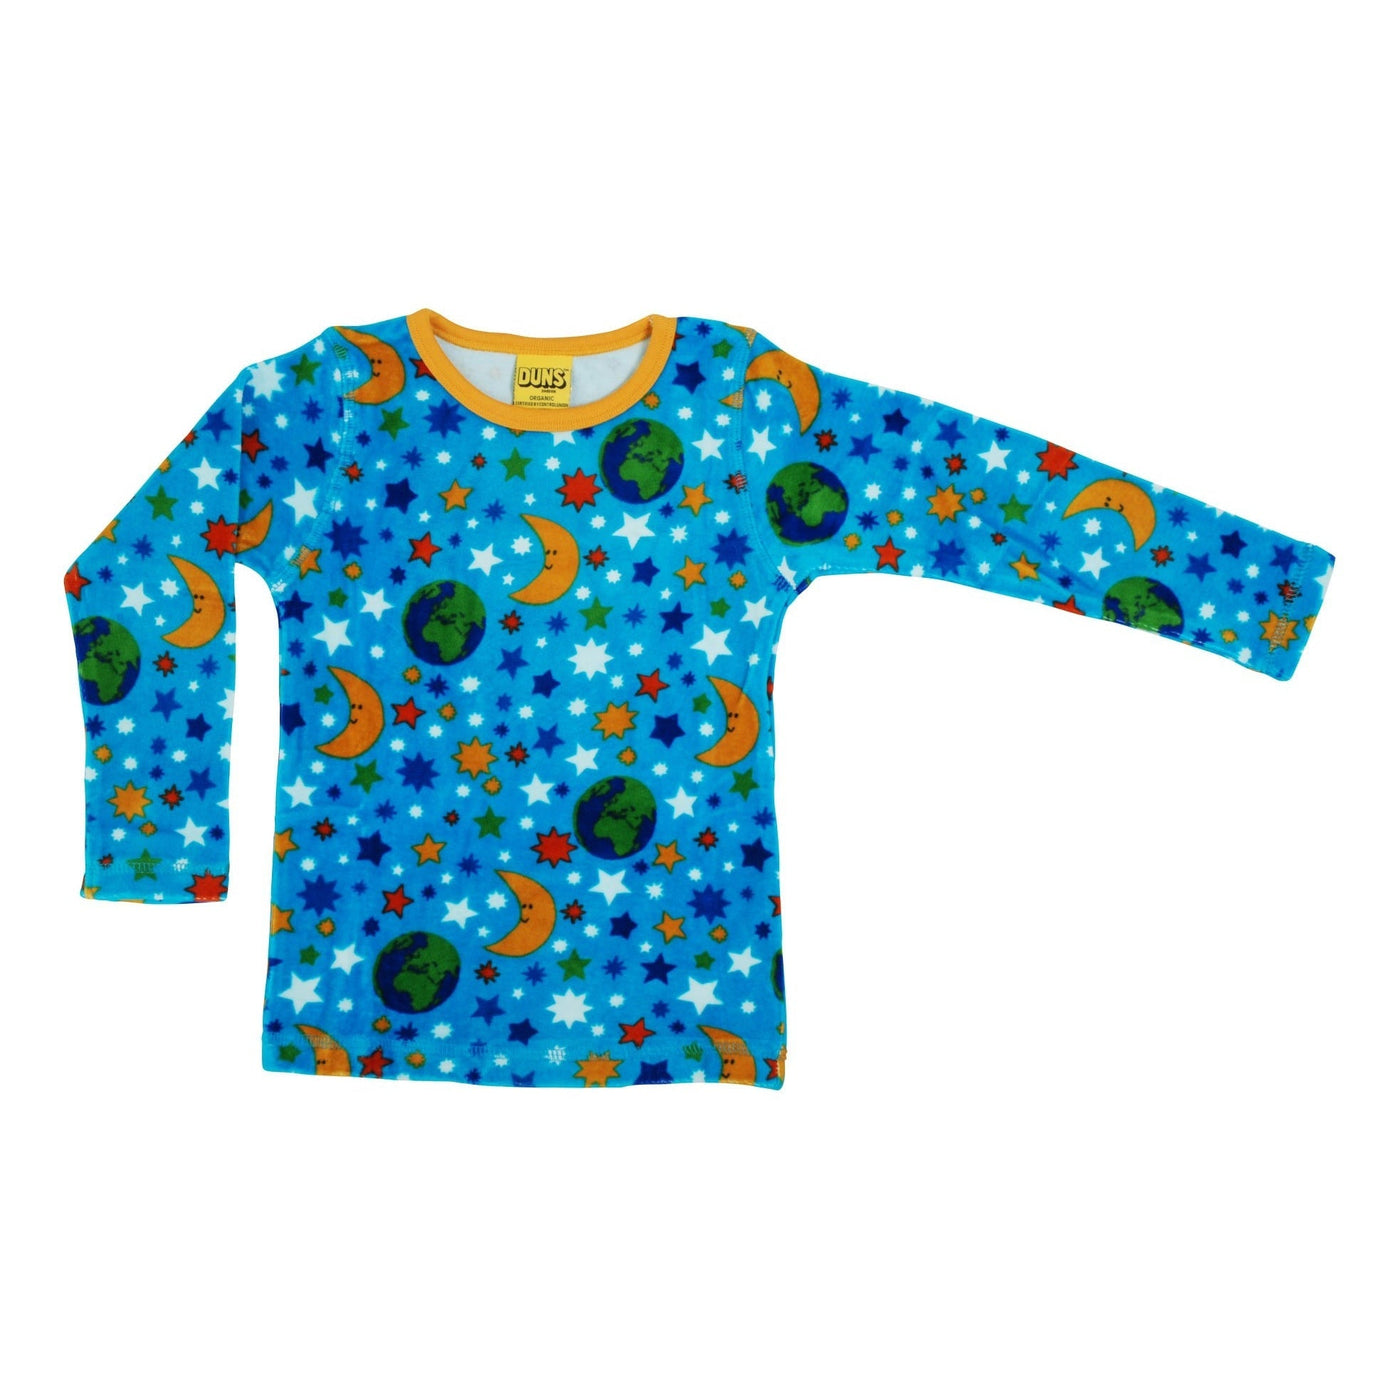 DUNS Long Sleeve Velour Top - Mother Earth Blue Atoll